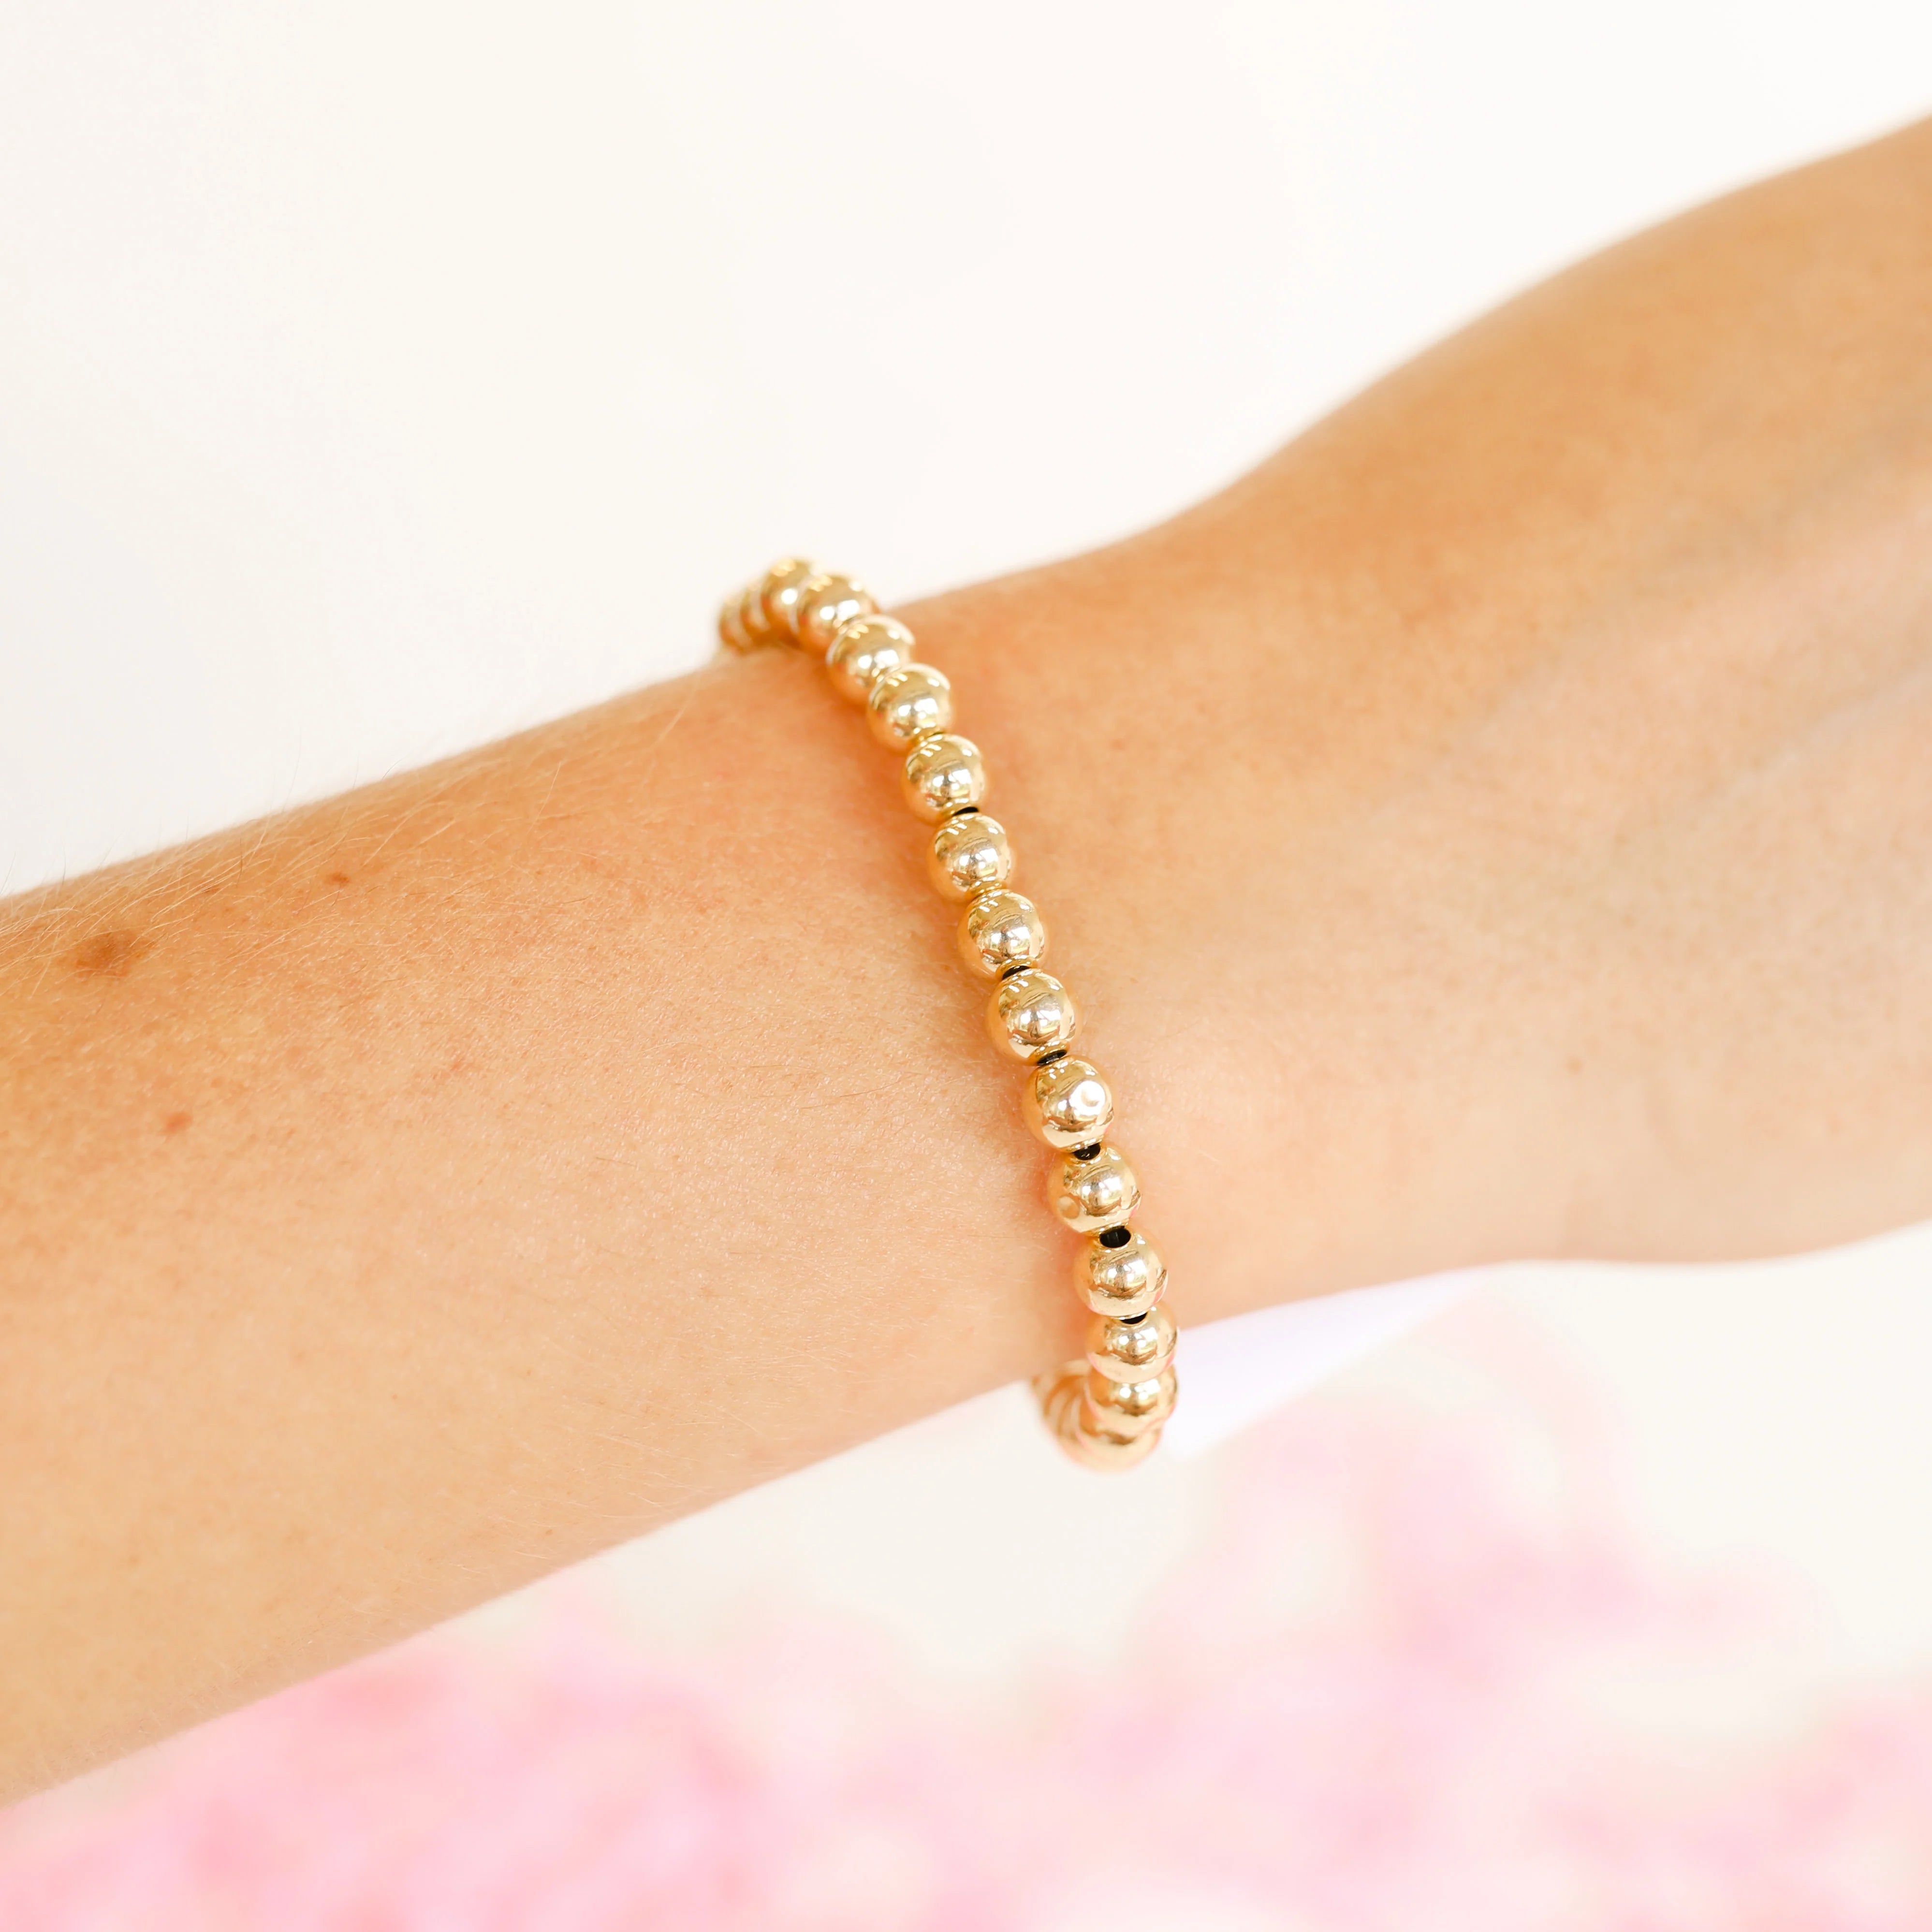 Beaded Blondes | 6MM Gold Beaded Bracelet - Giddy Up Glamour Boutique